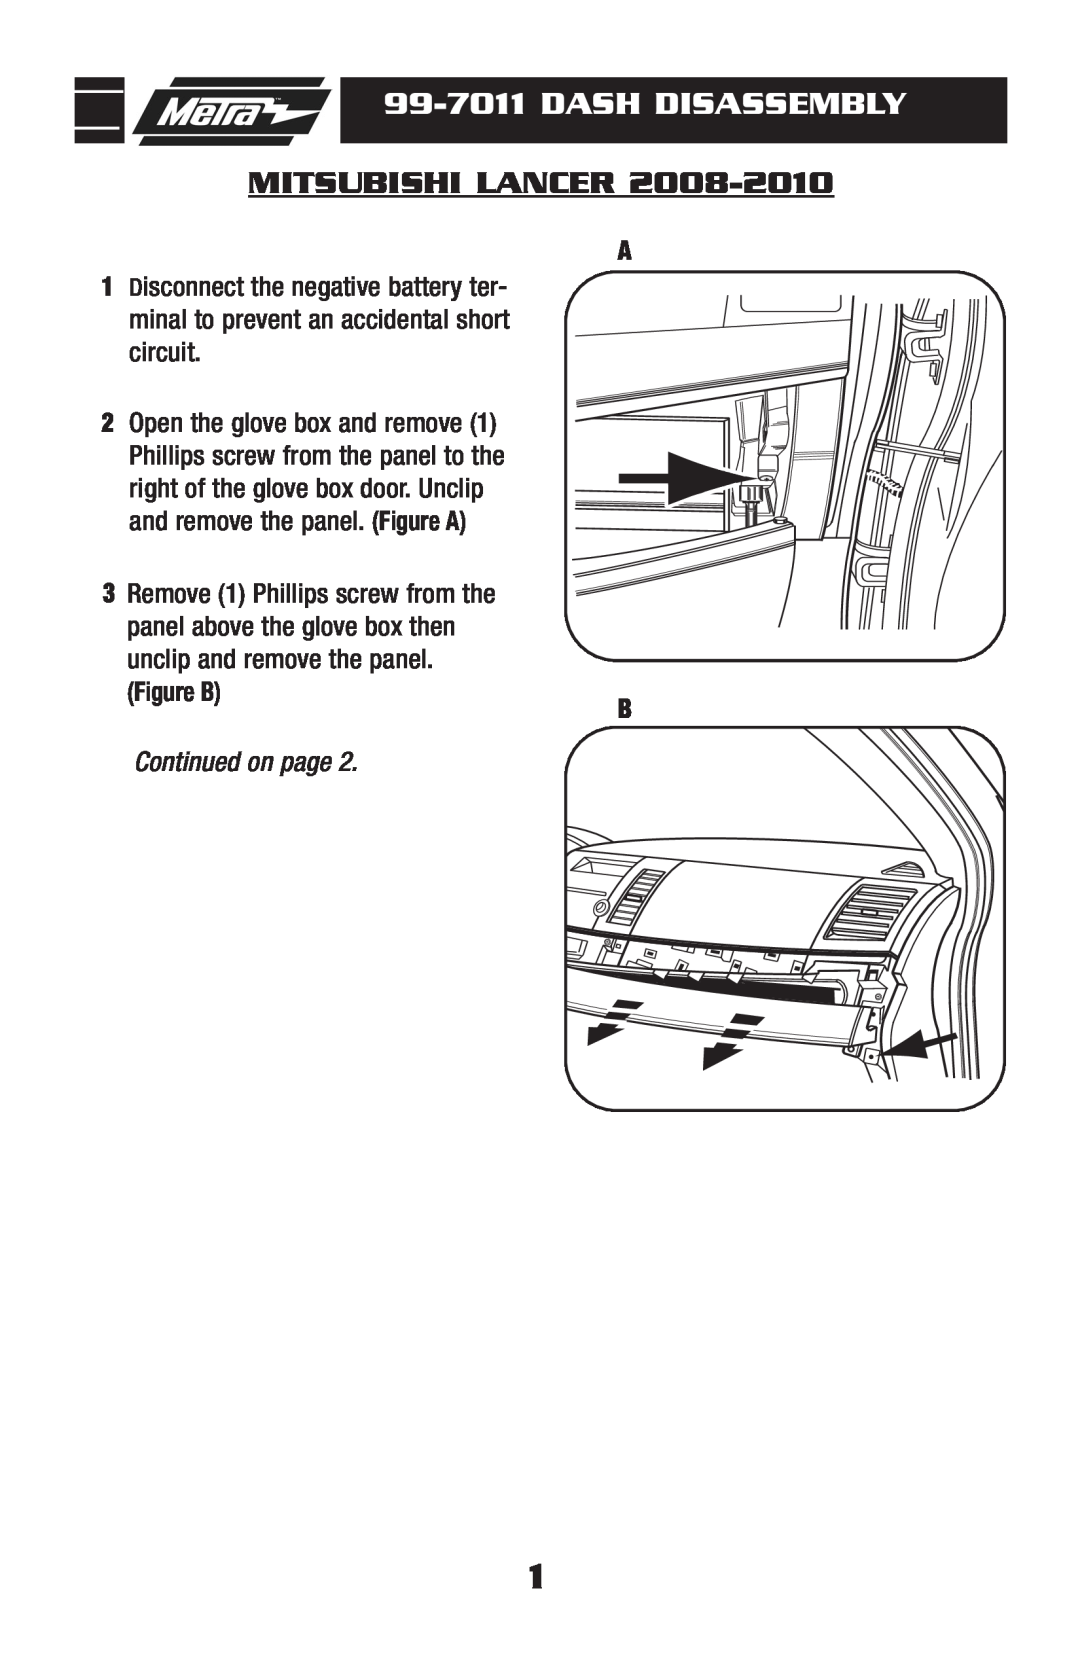 Metra Electronics installation instructions 99-7011DASH DISASSEMBLY, Mitsubishi Lancer, Figure B B, Continued on page 